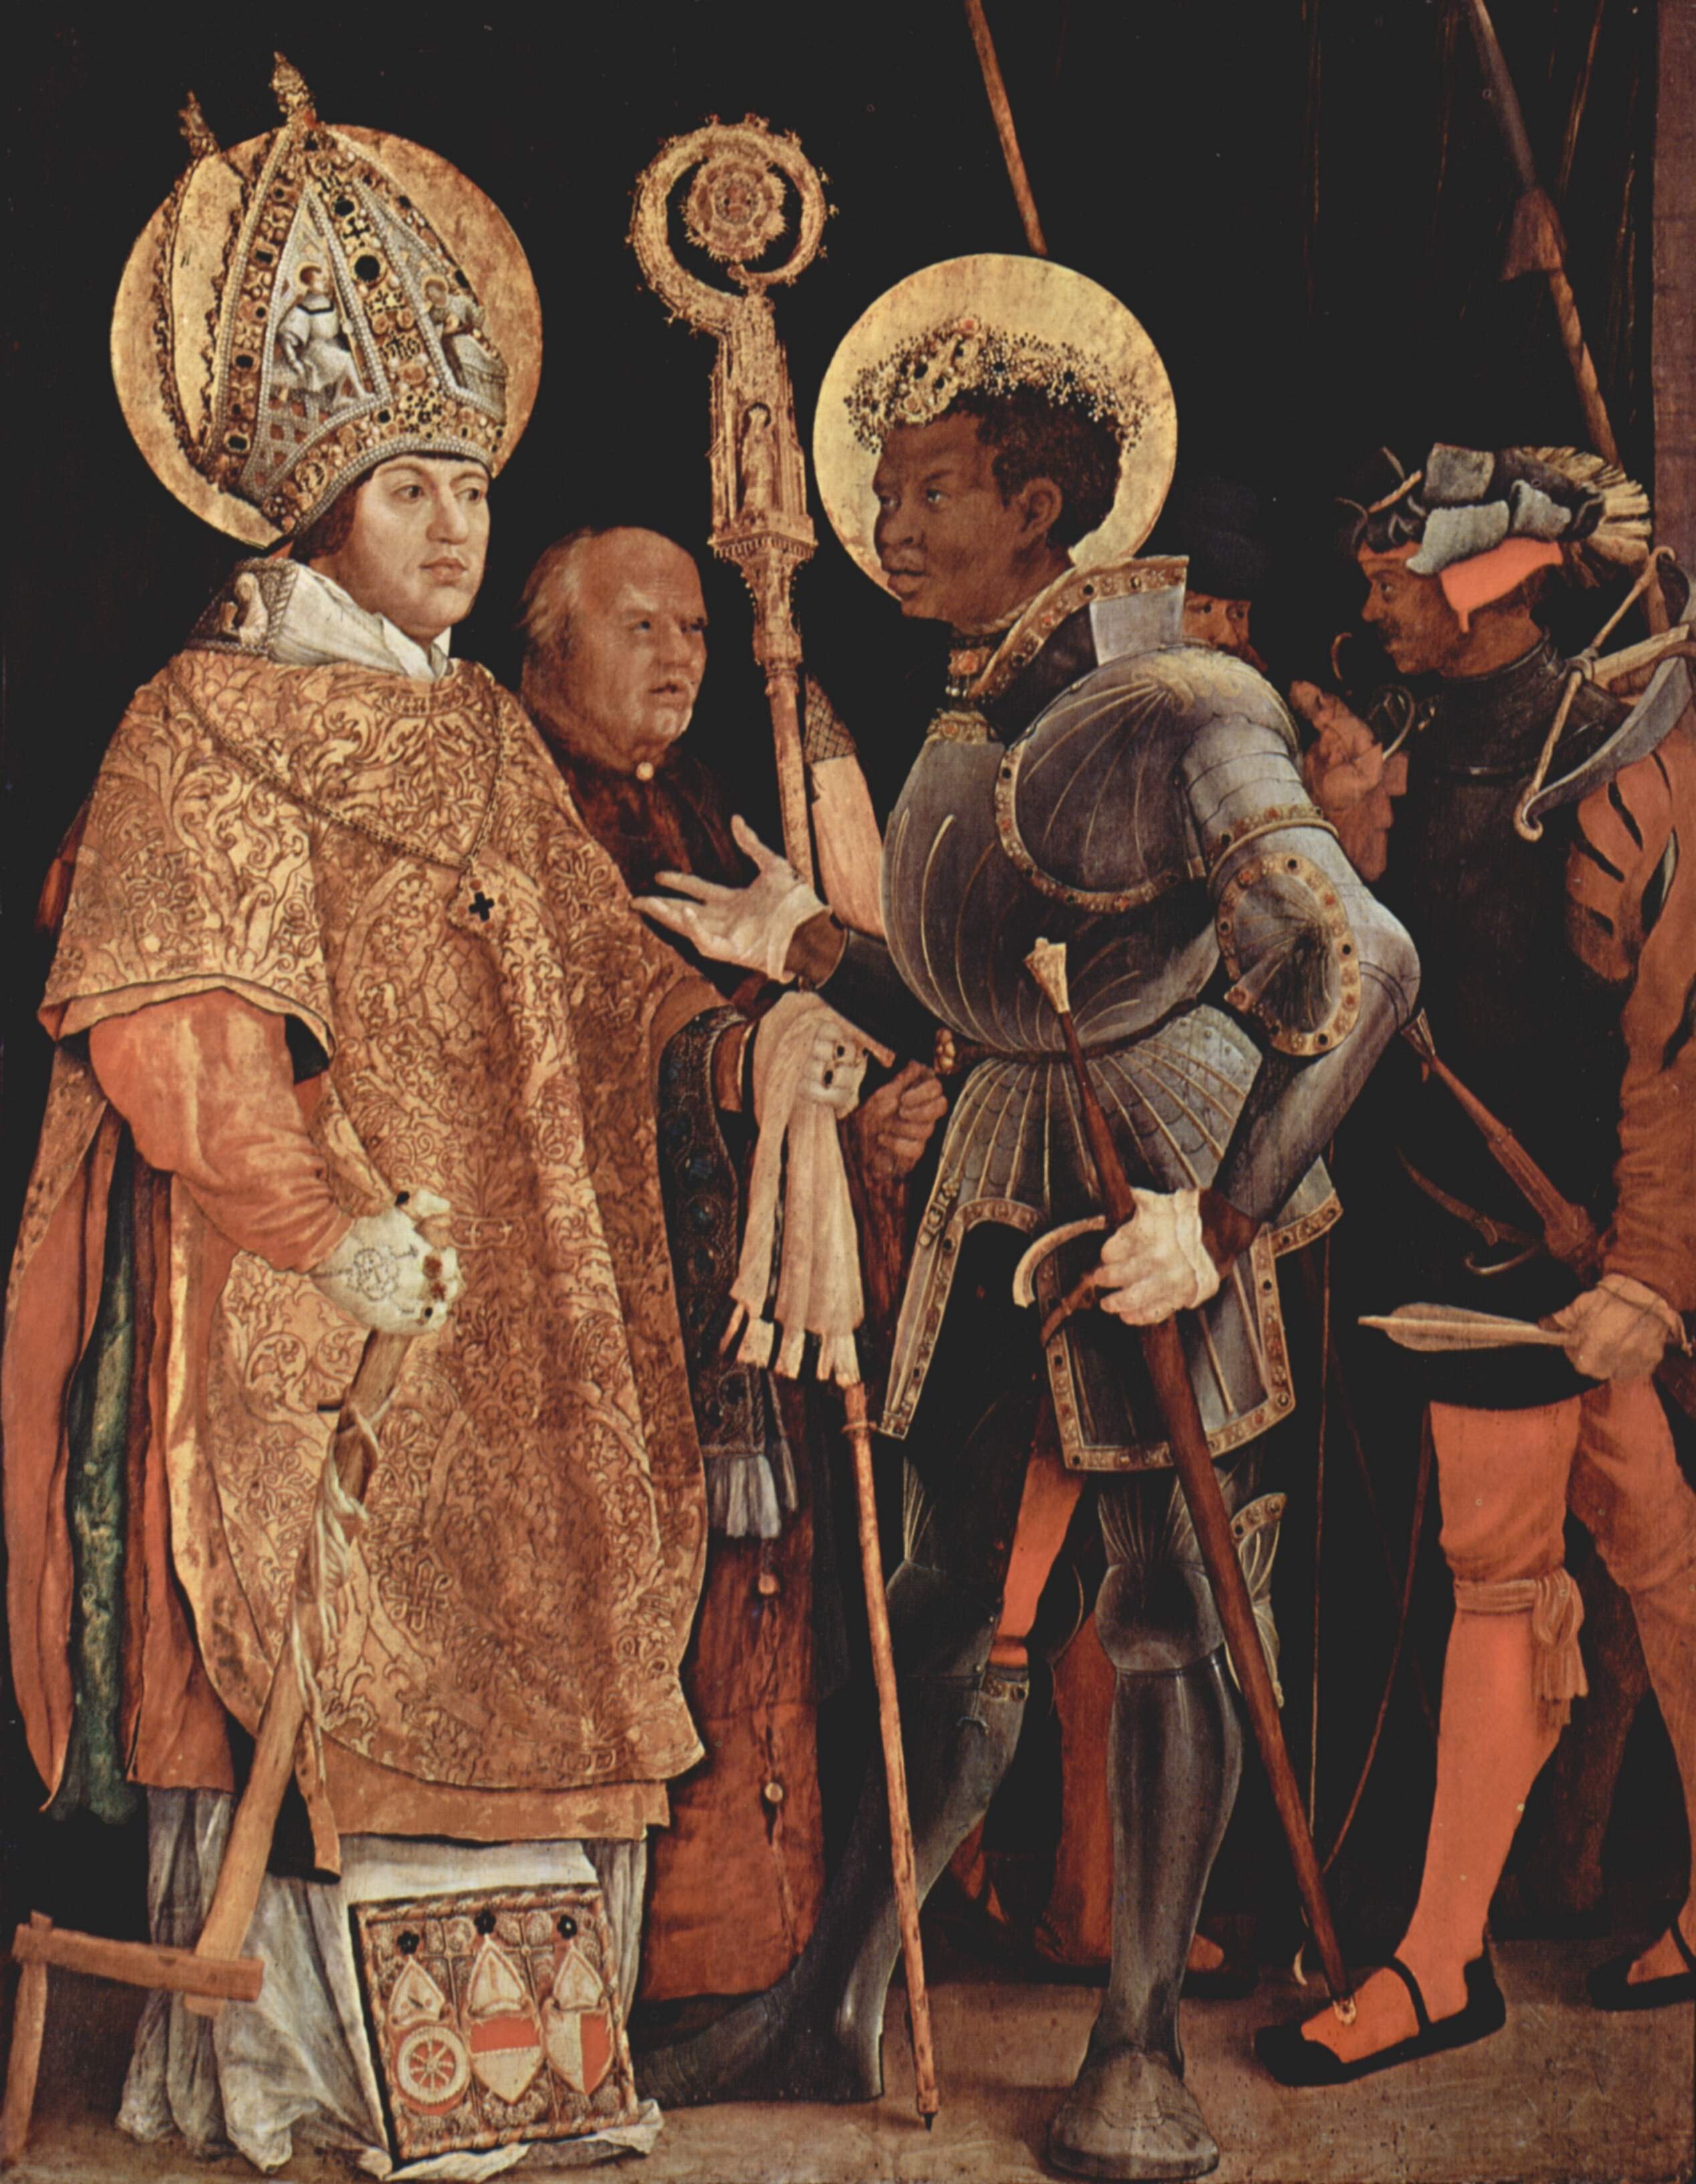 Image of St. Maurice, an African saint portrayed in sixteenth-century European armor as a knight.